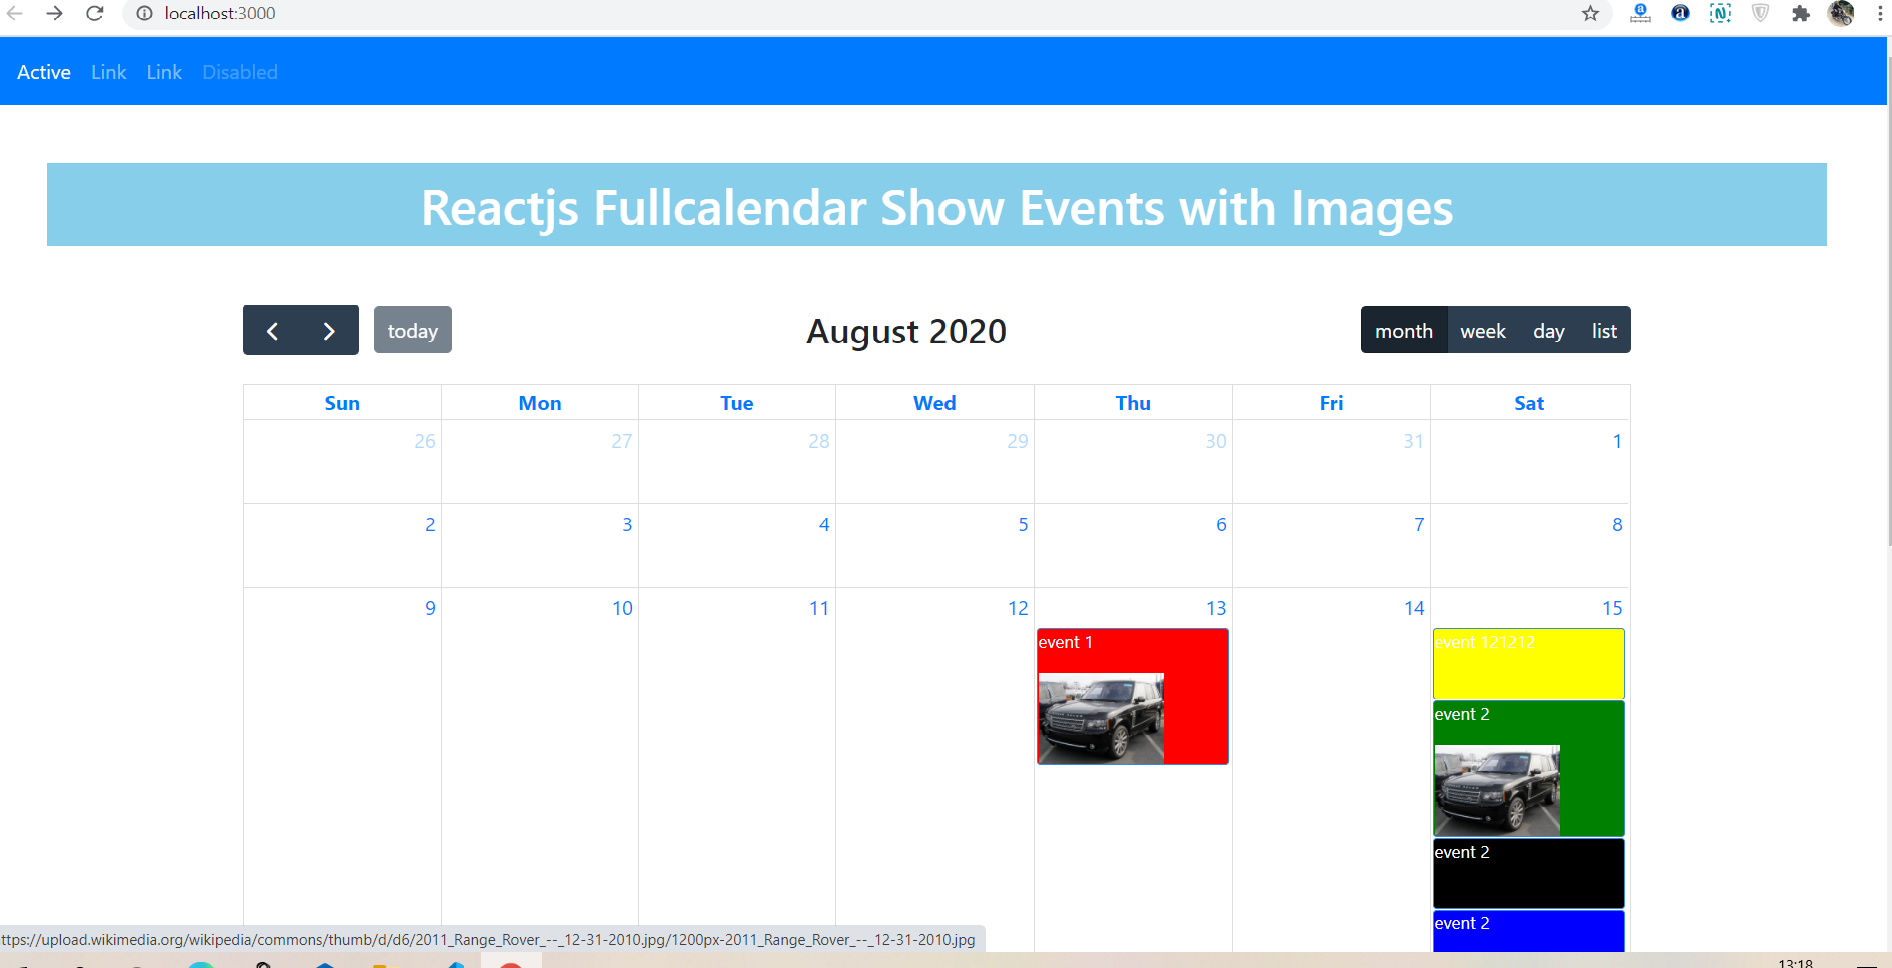 How to show event with image in fullcalendar in reactjs?